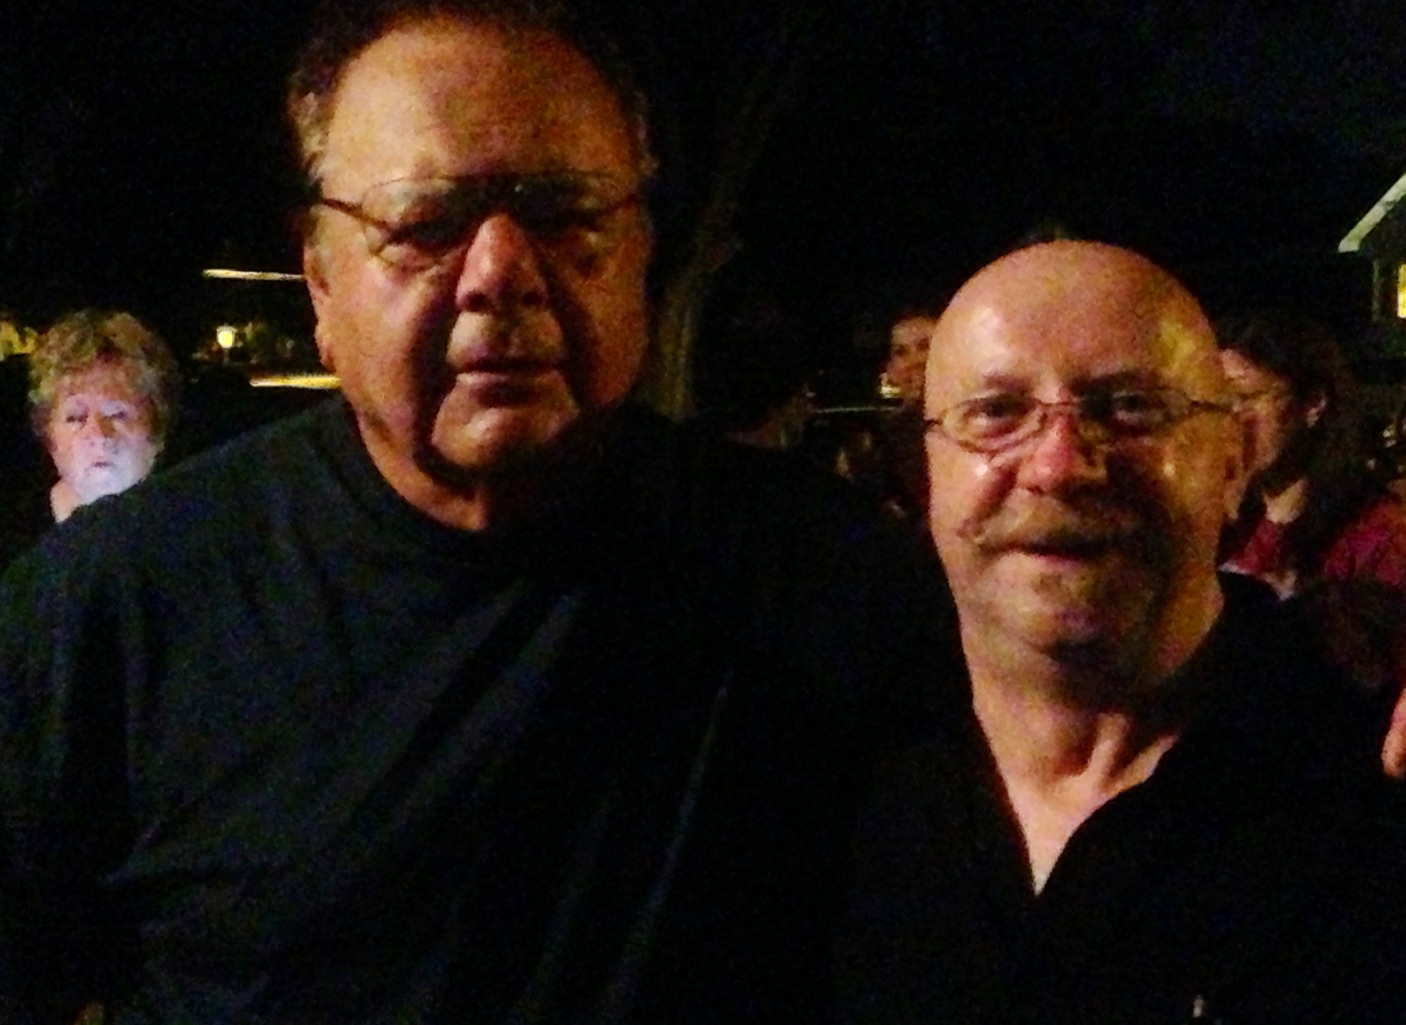 Paul Sorvino and Edmond G Coisson at Precious Mettle's wrap party